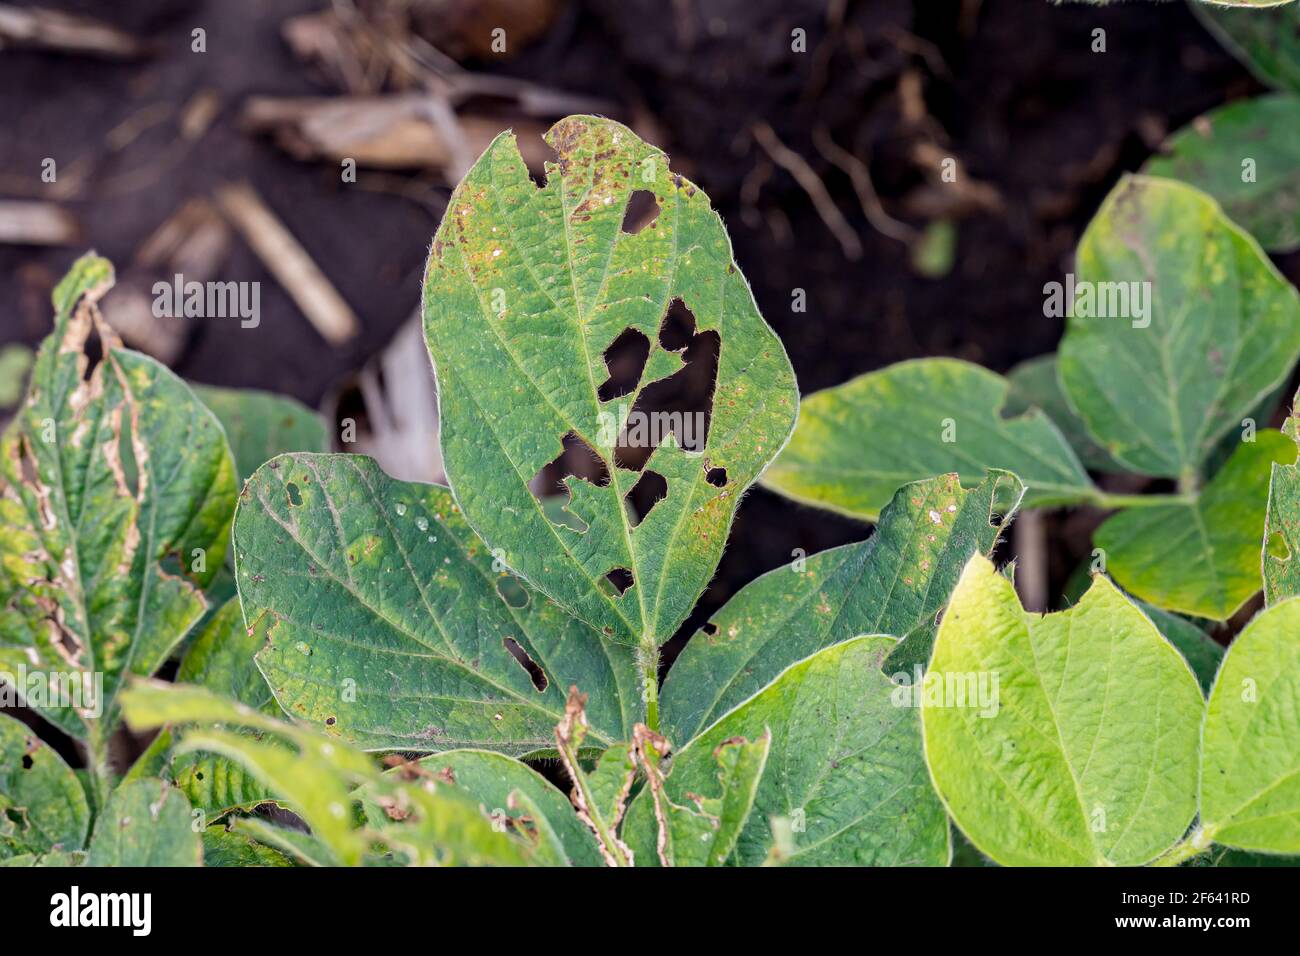 Closeup of soybean plant leaf with chemical herbicide damage. Concept of farming, weed control, yield loss. Stock Photo